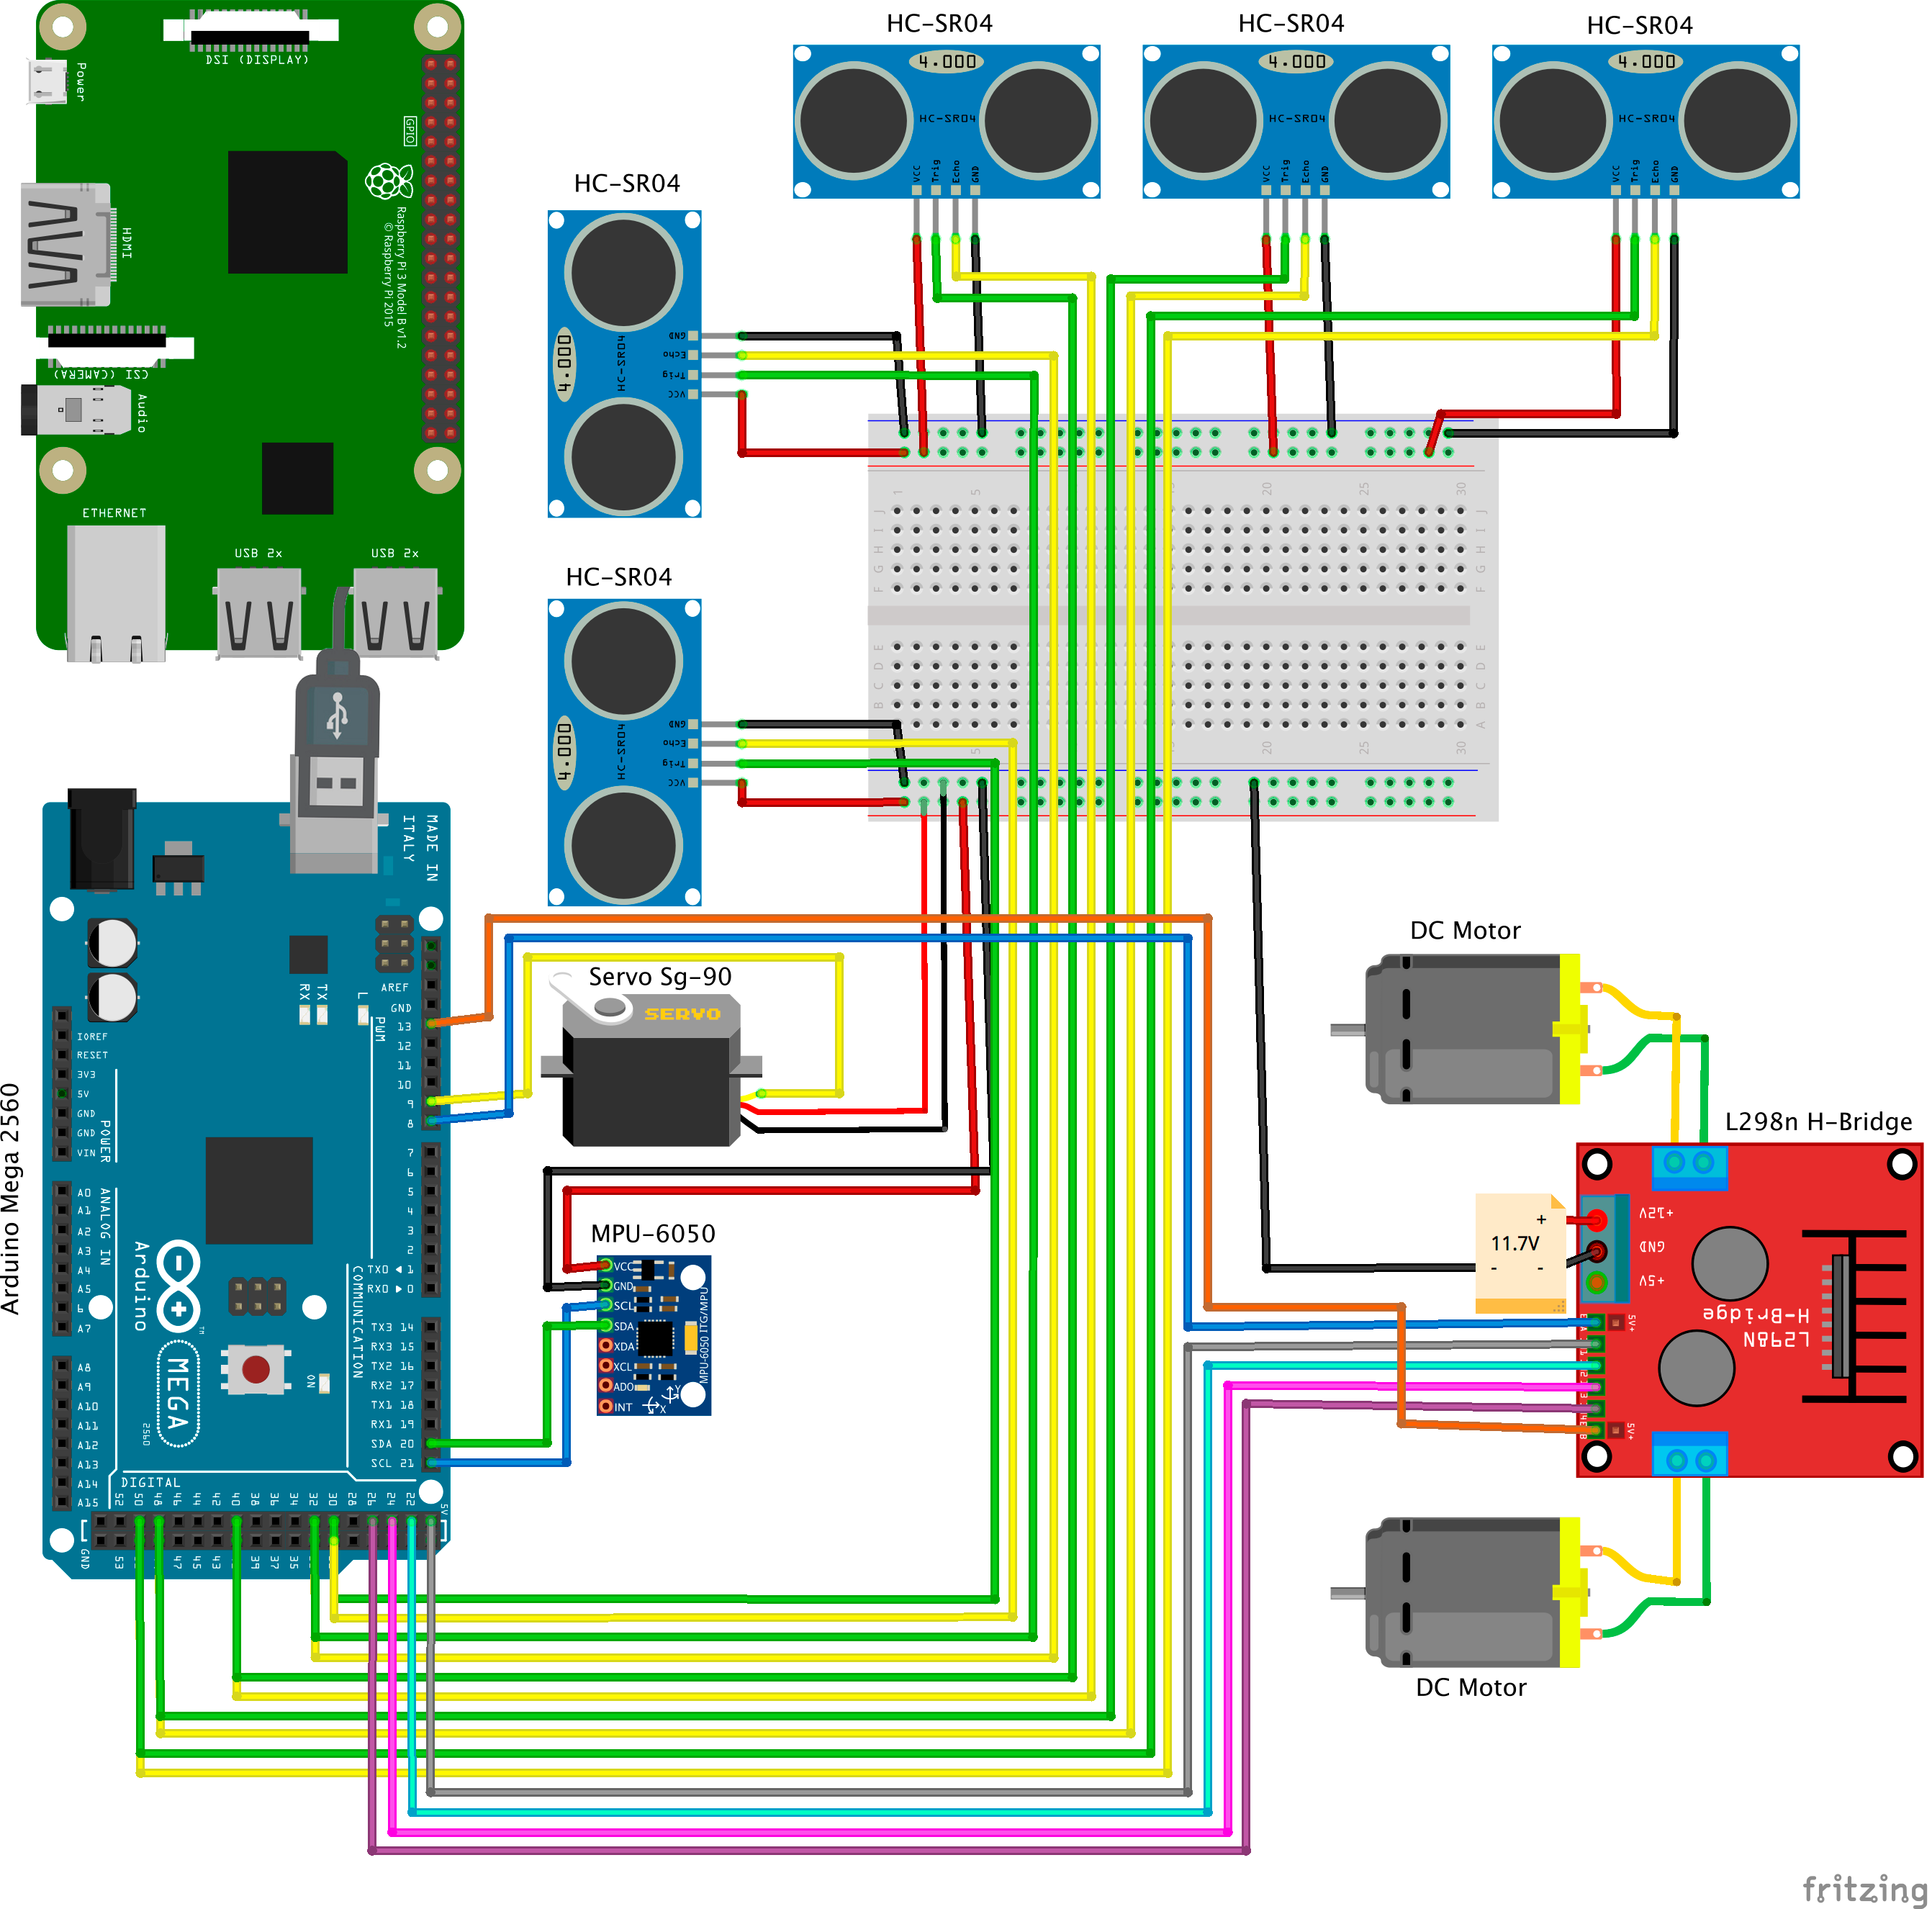 Hardware architecture of our home-made mobile robot